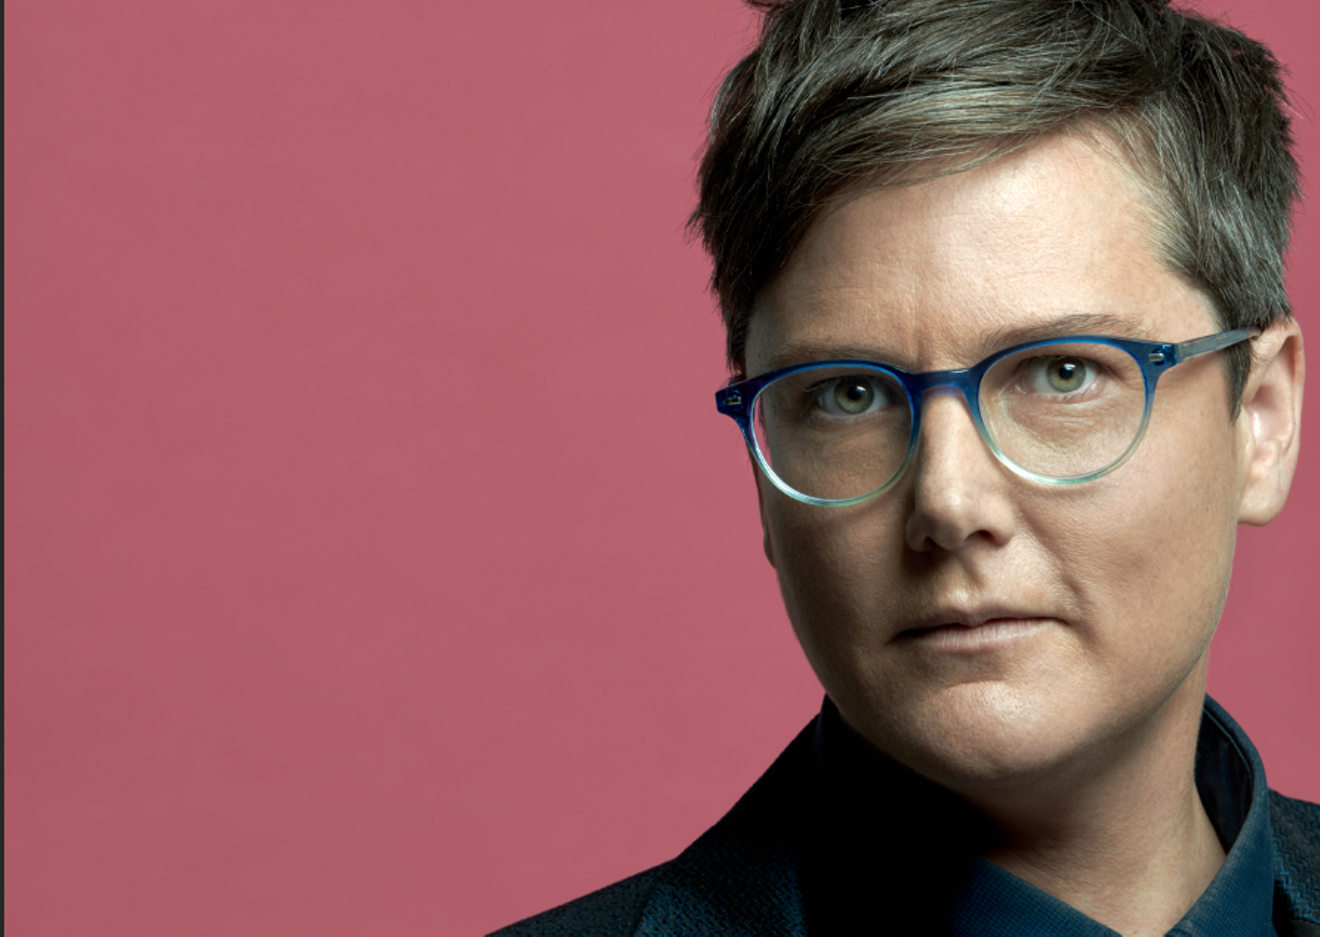 Hannah Gadsby is embracing the Nanette glory, and introducing her new friend Douglas